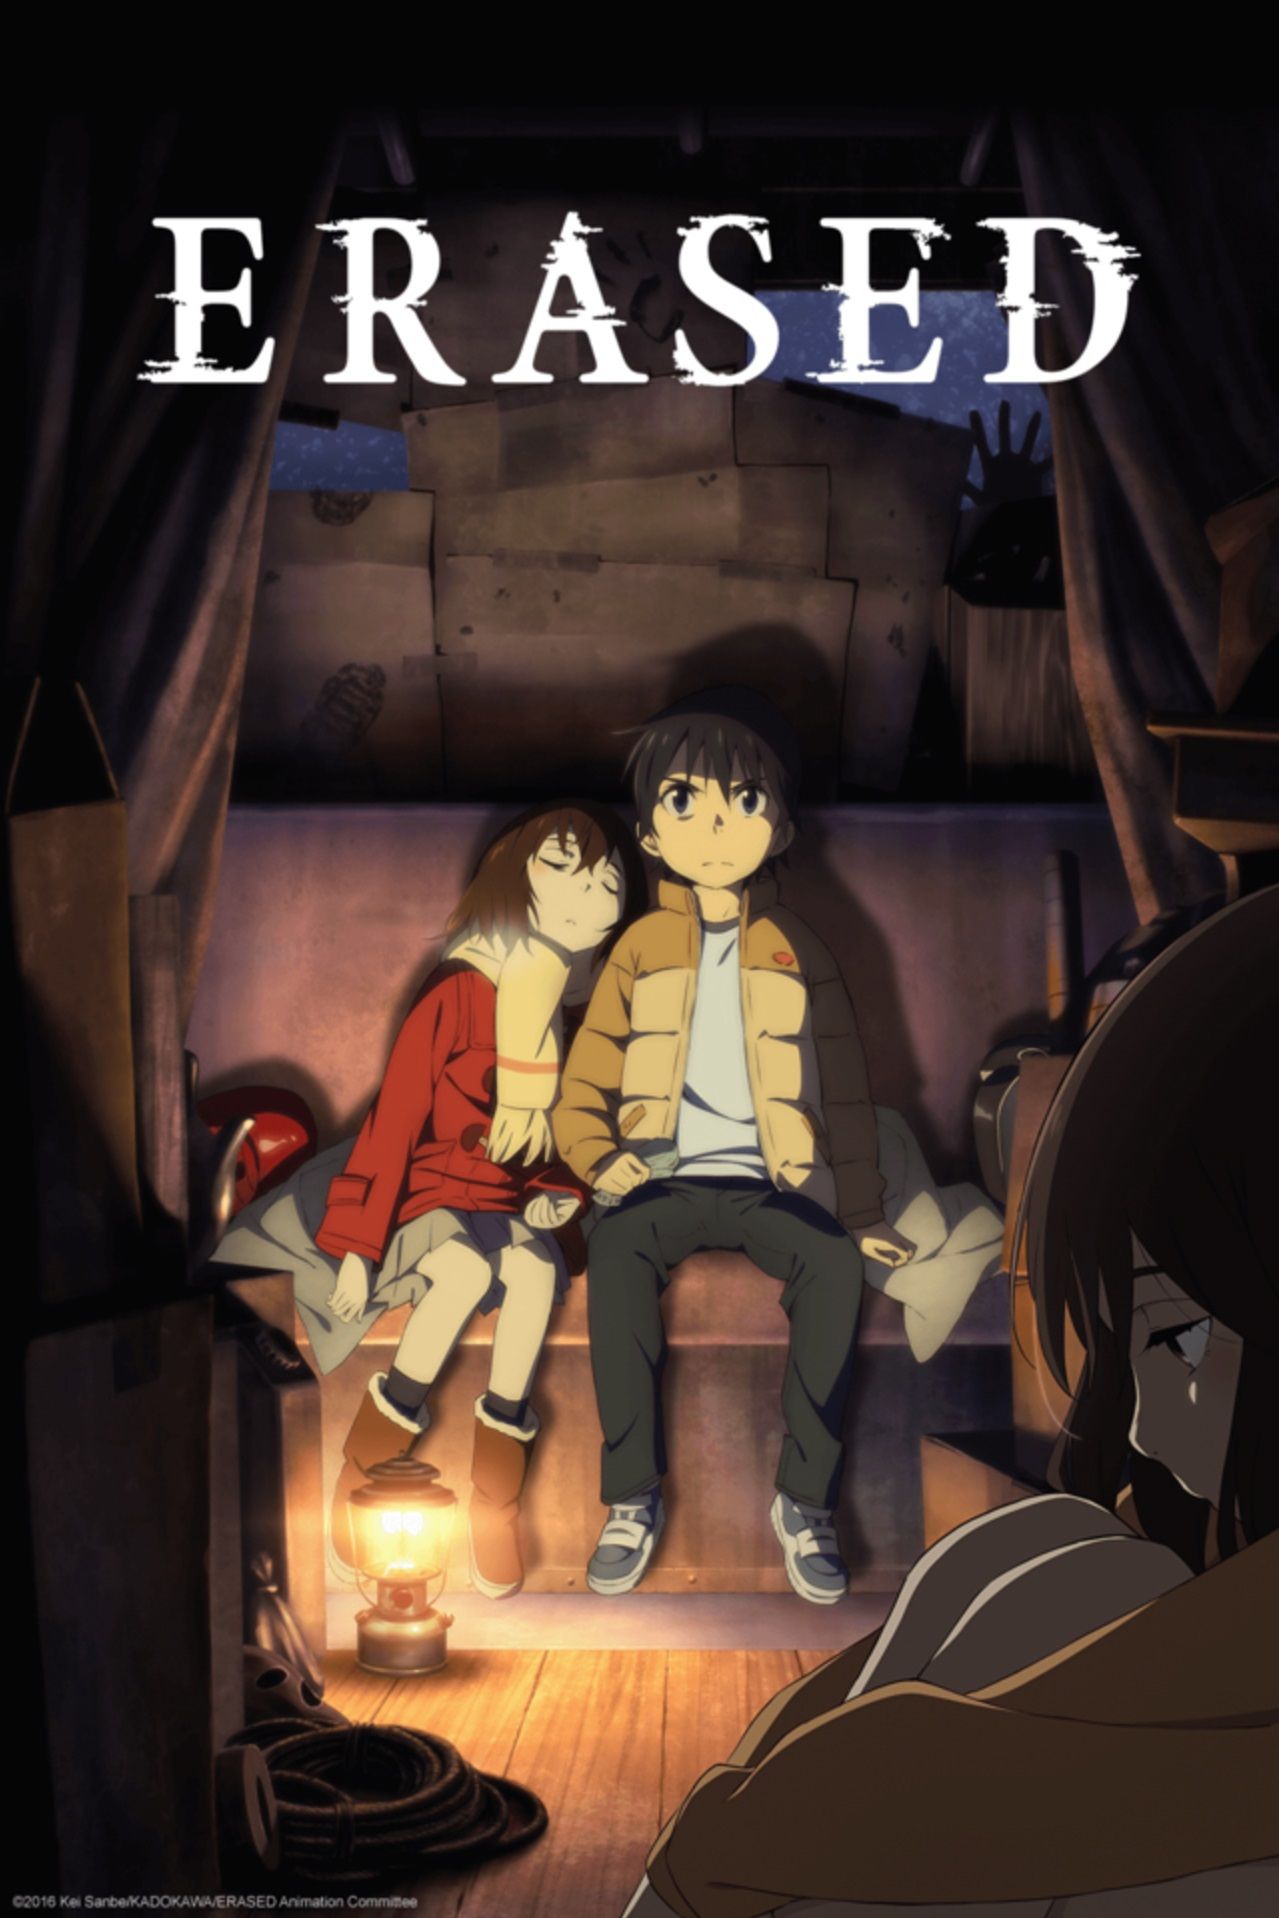 Anime Movies That Will Make You Feel All The Feels - KKday Blog